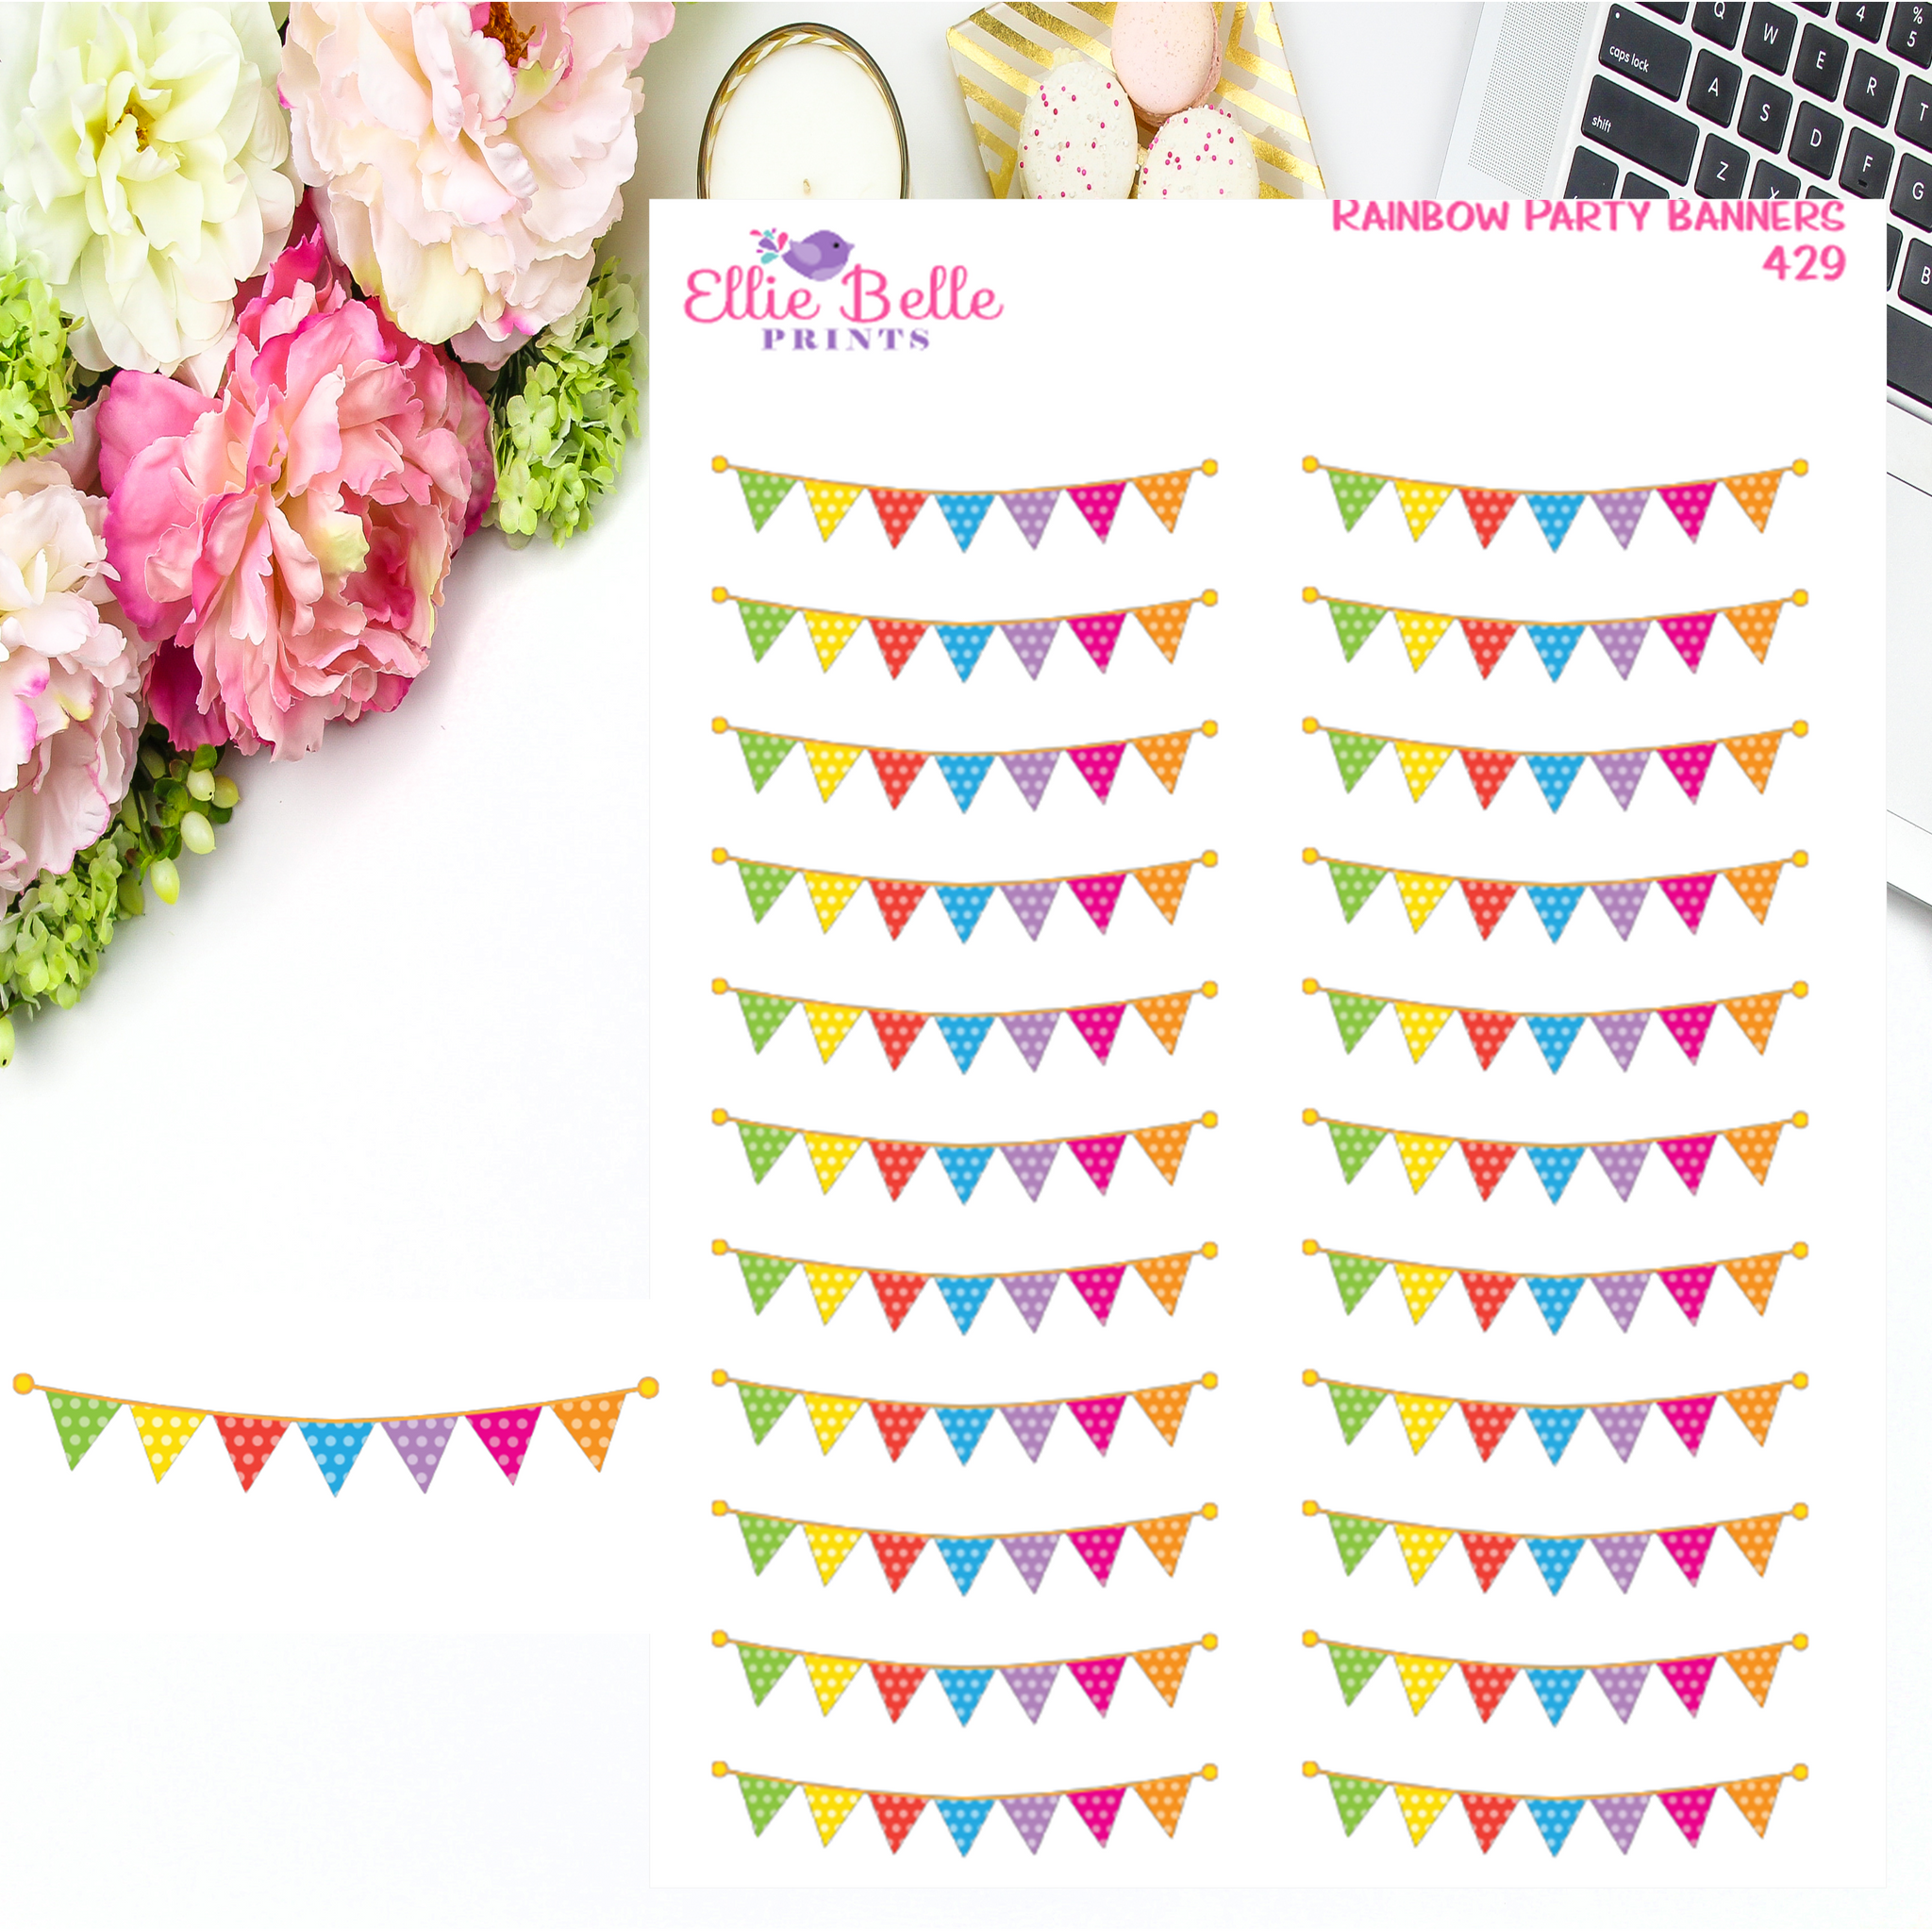 Rainbow Party Banner Stickers